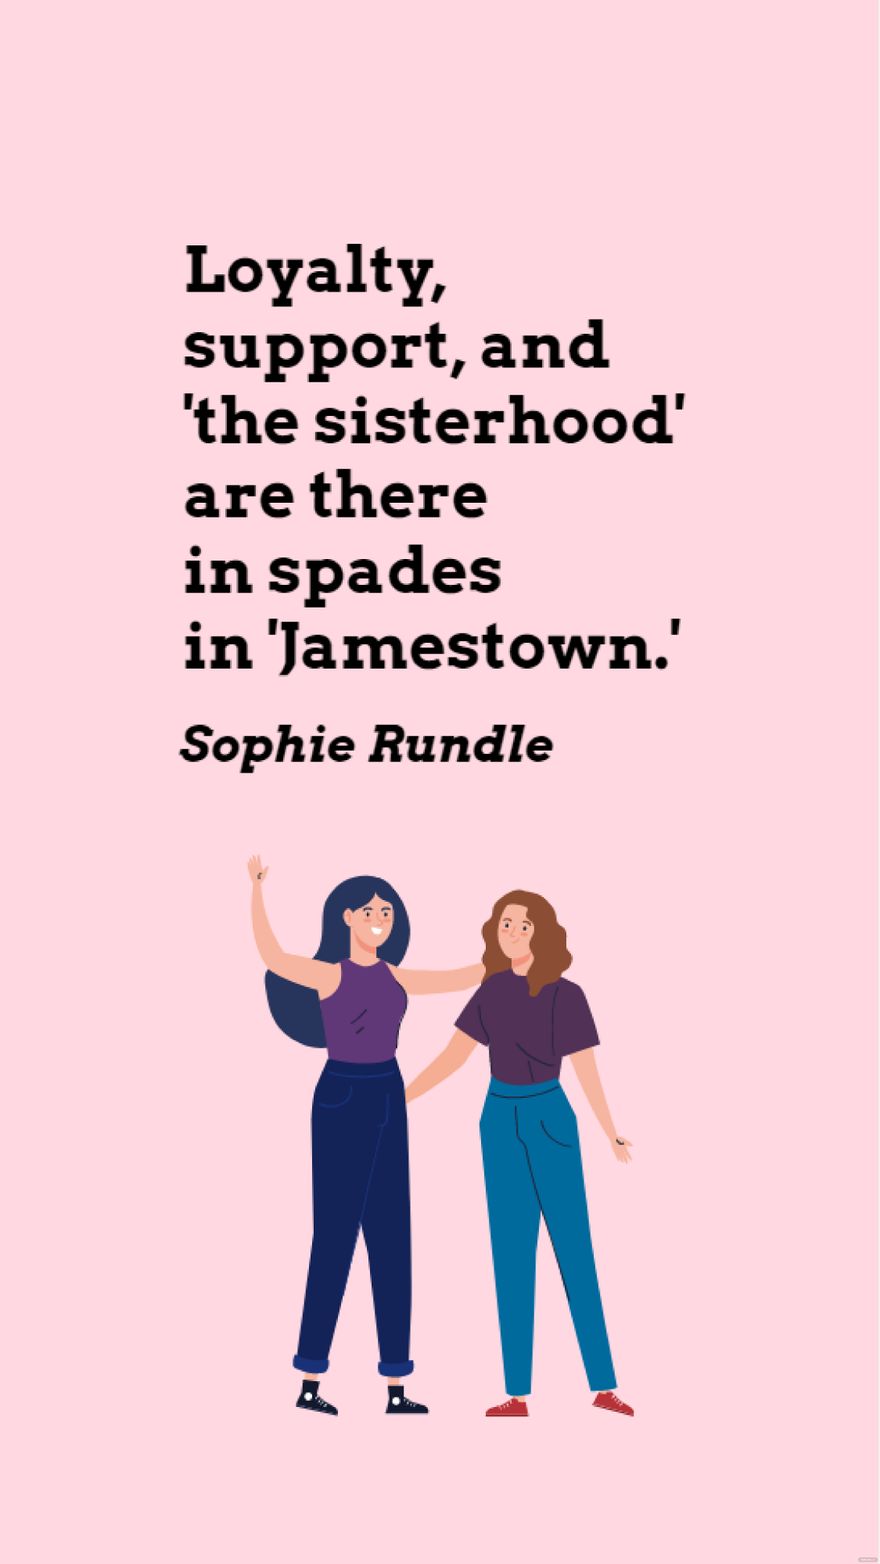 Free Sophie Rundle - Loyalty, support, and 'the sisterhood' are there in spades in 'Jamestown.' in JPG